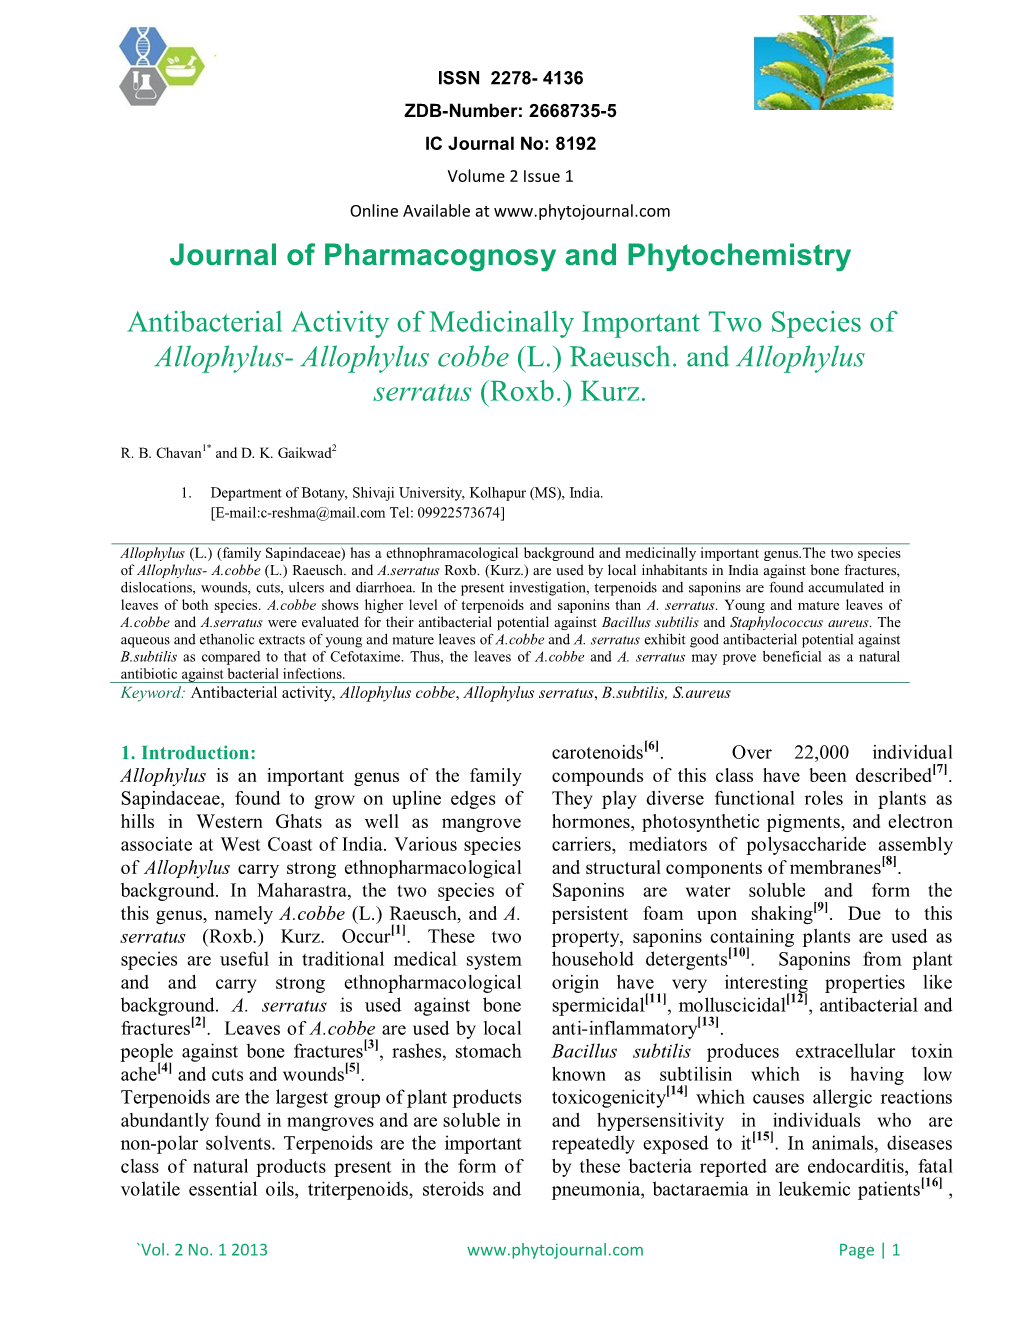 Journal of Pharmacognosy and Phytochemistry Antibacterial Activity of Medicinally Important Two Species of Allophylus- Allophylu